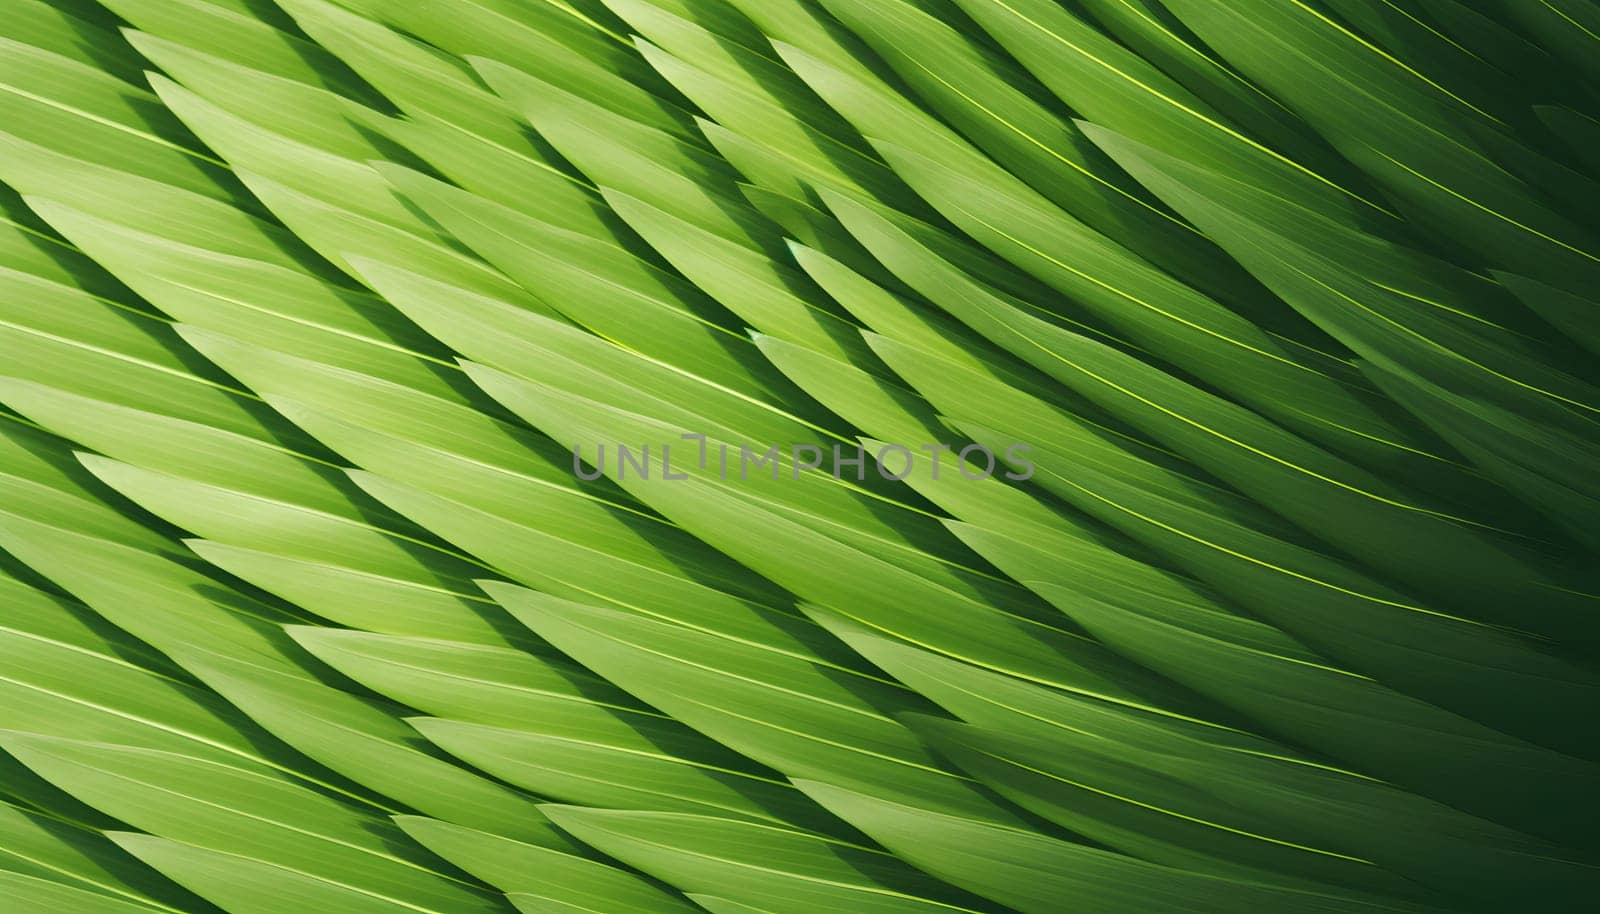 This close-up image showcases the intricate details of a vibrant green striped palm leaf, capturing the natural beauty and textures up close.